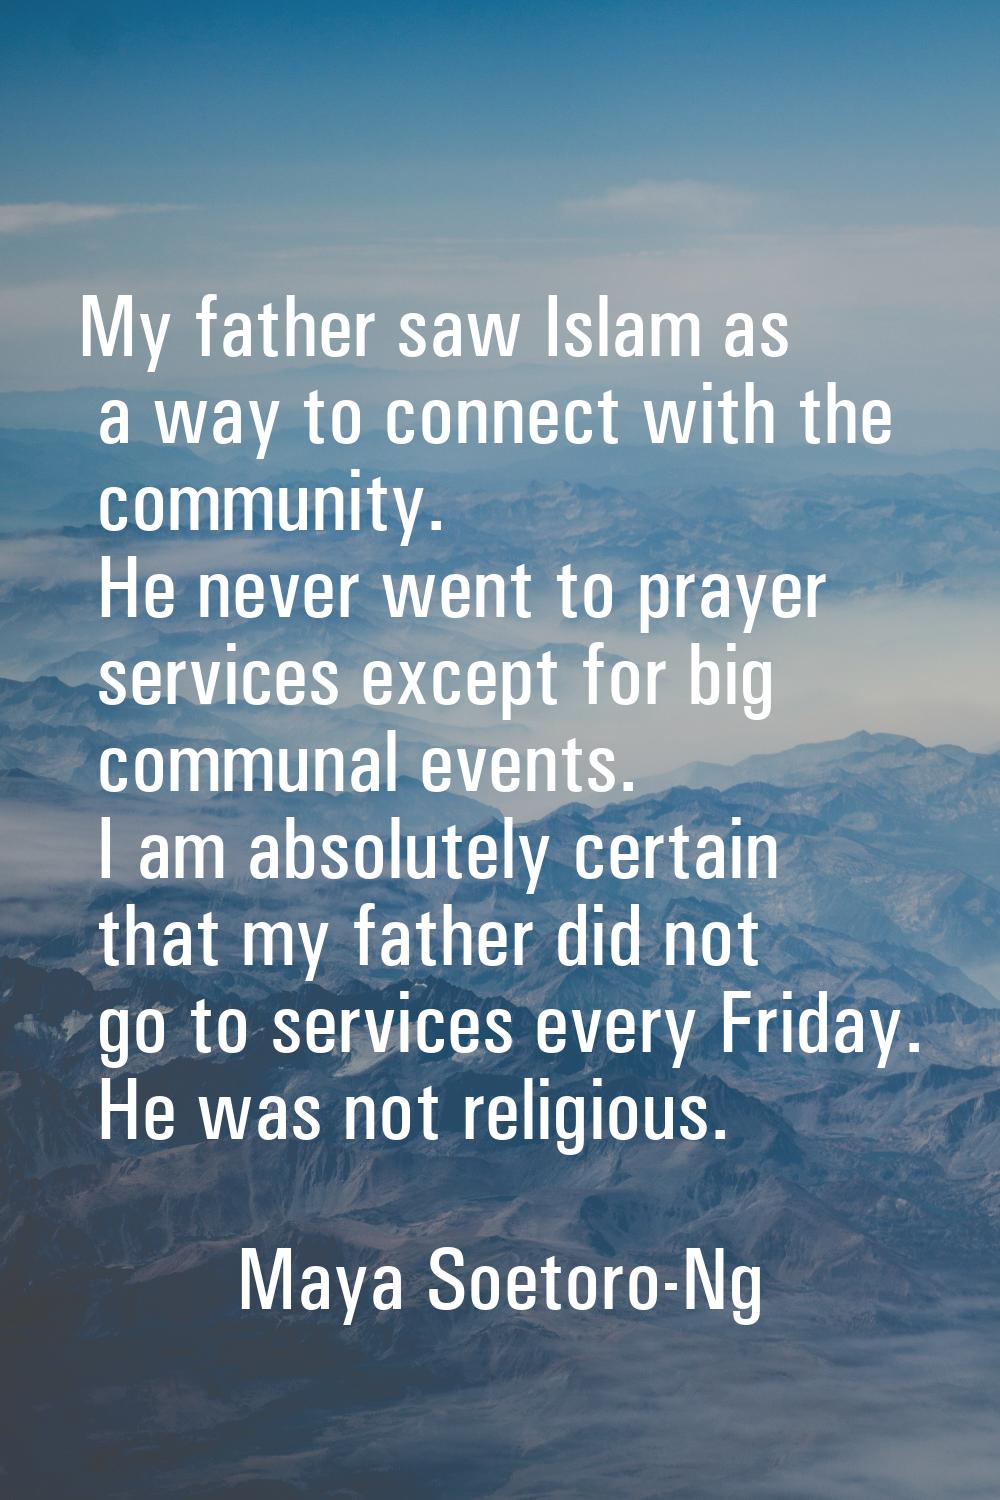 My father saw Islam as a way to connect with the community. He never went to prayer services except